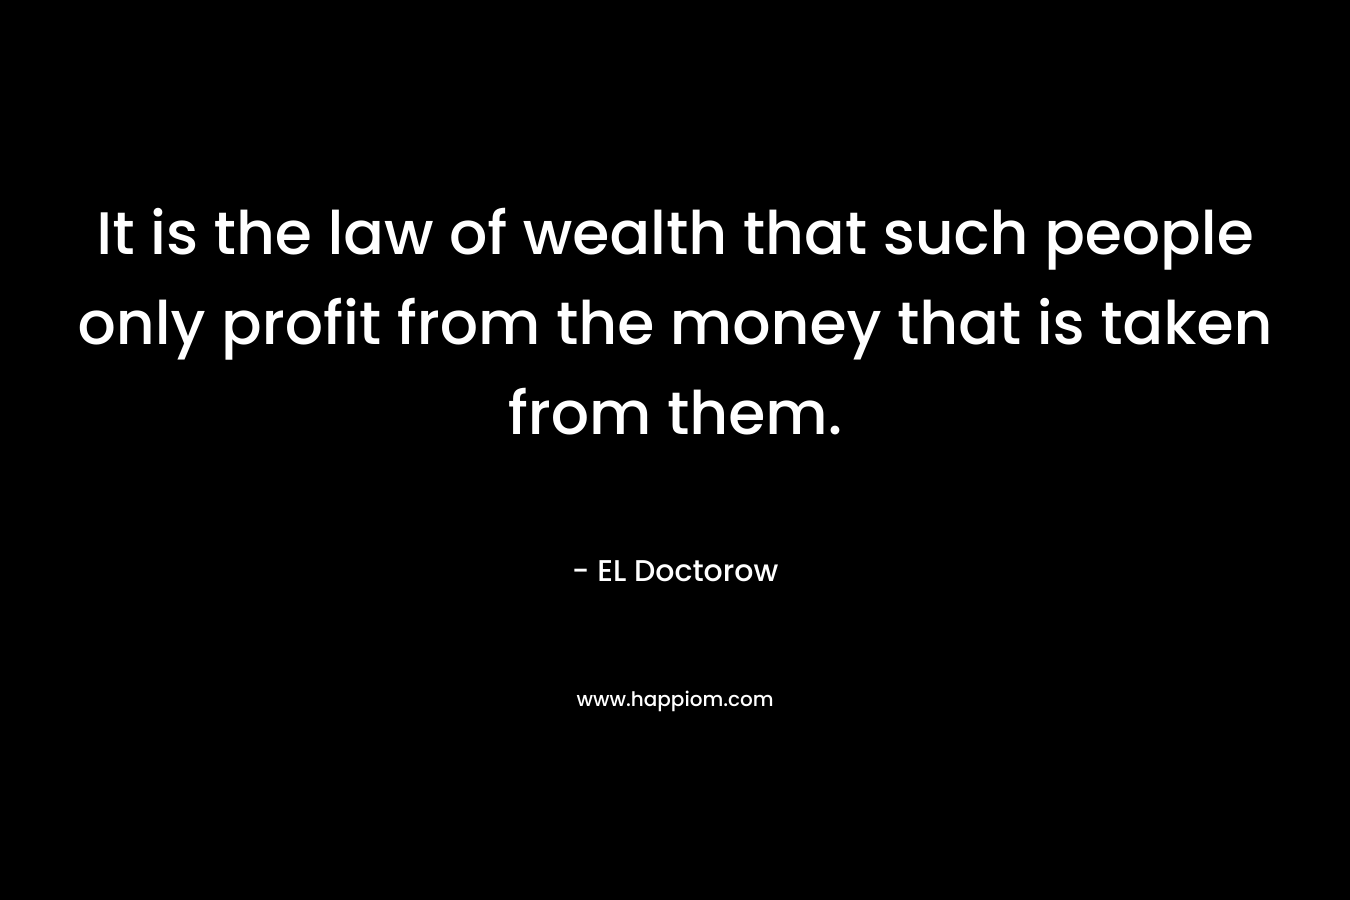 It is the law of wealth that such people only profit from the money that is taken from them.